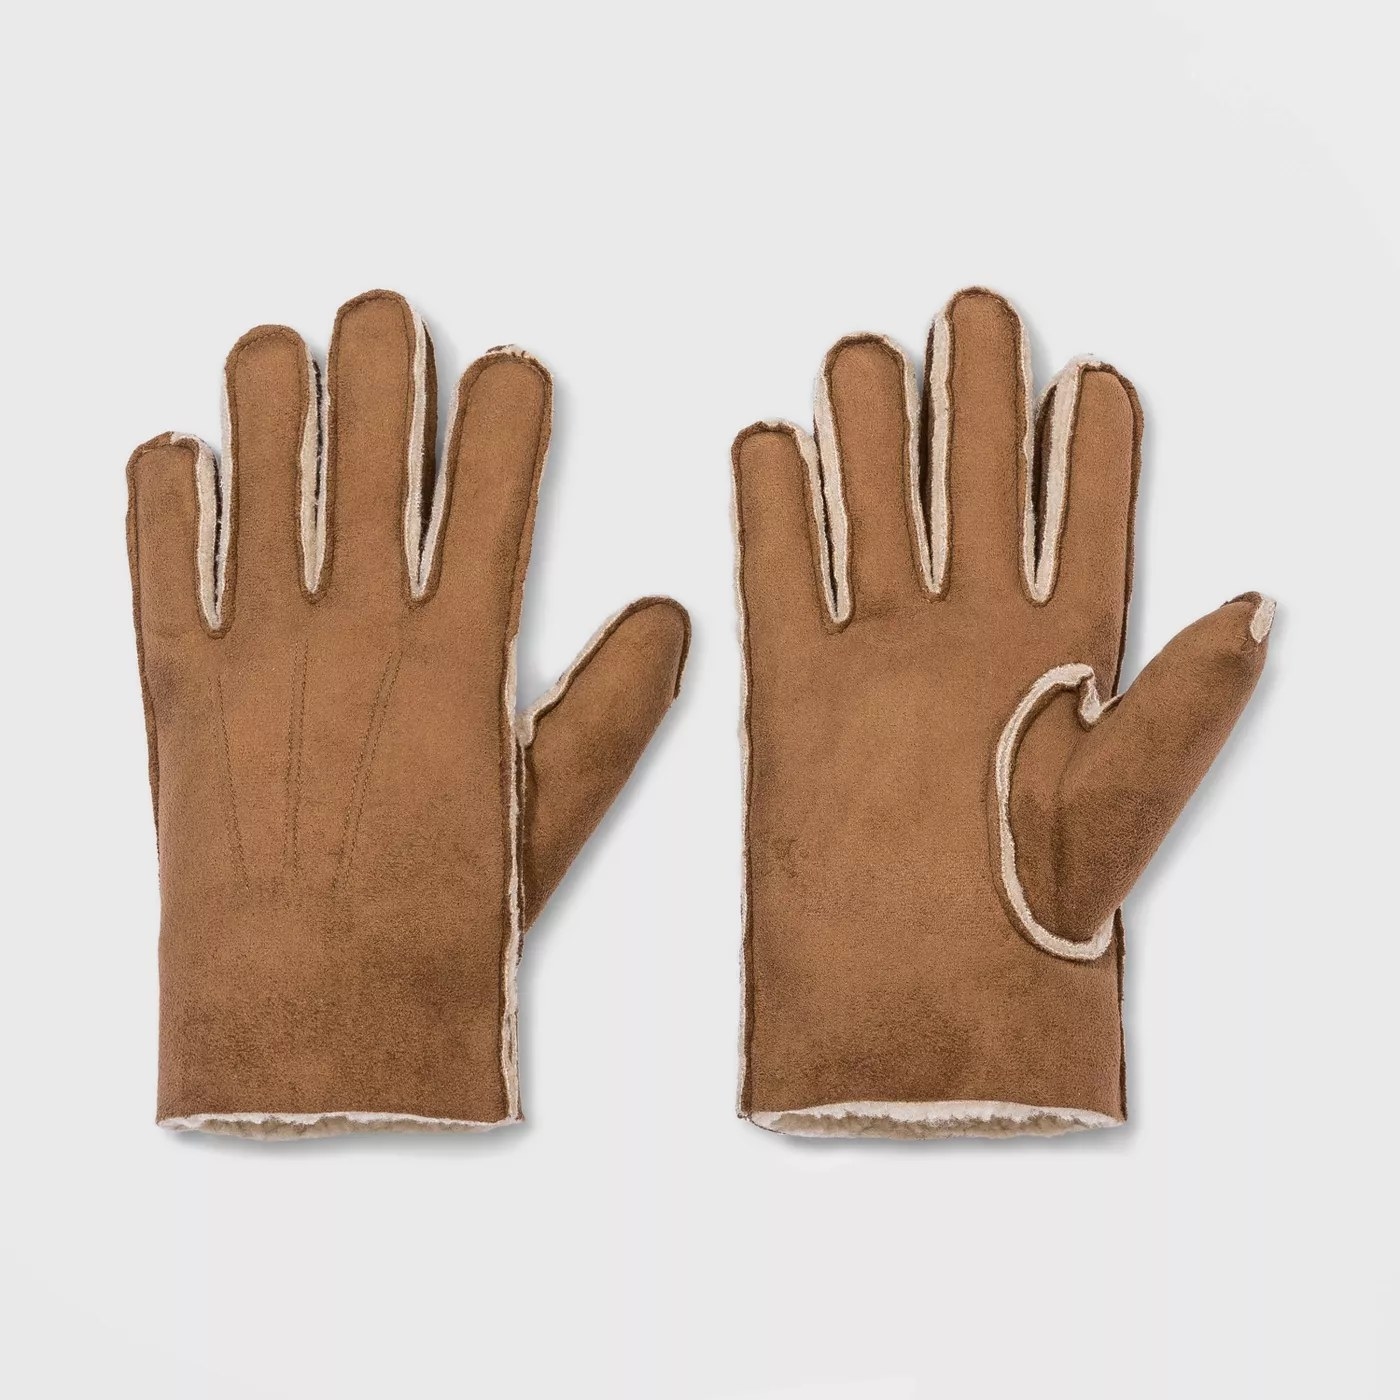 The Sherpa gloves